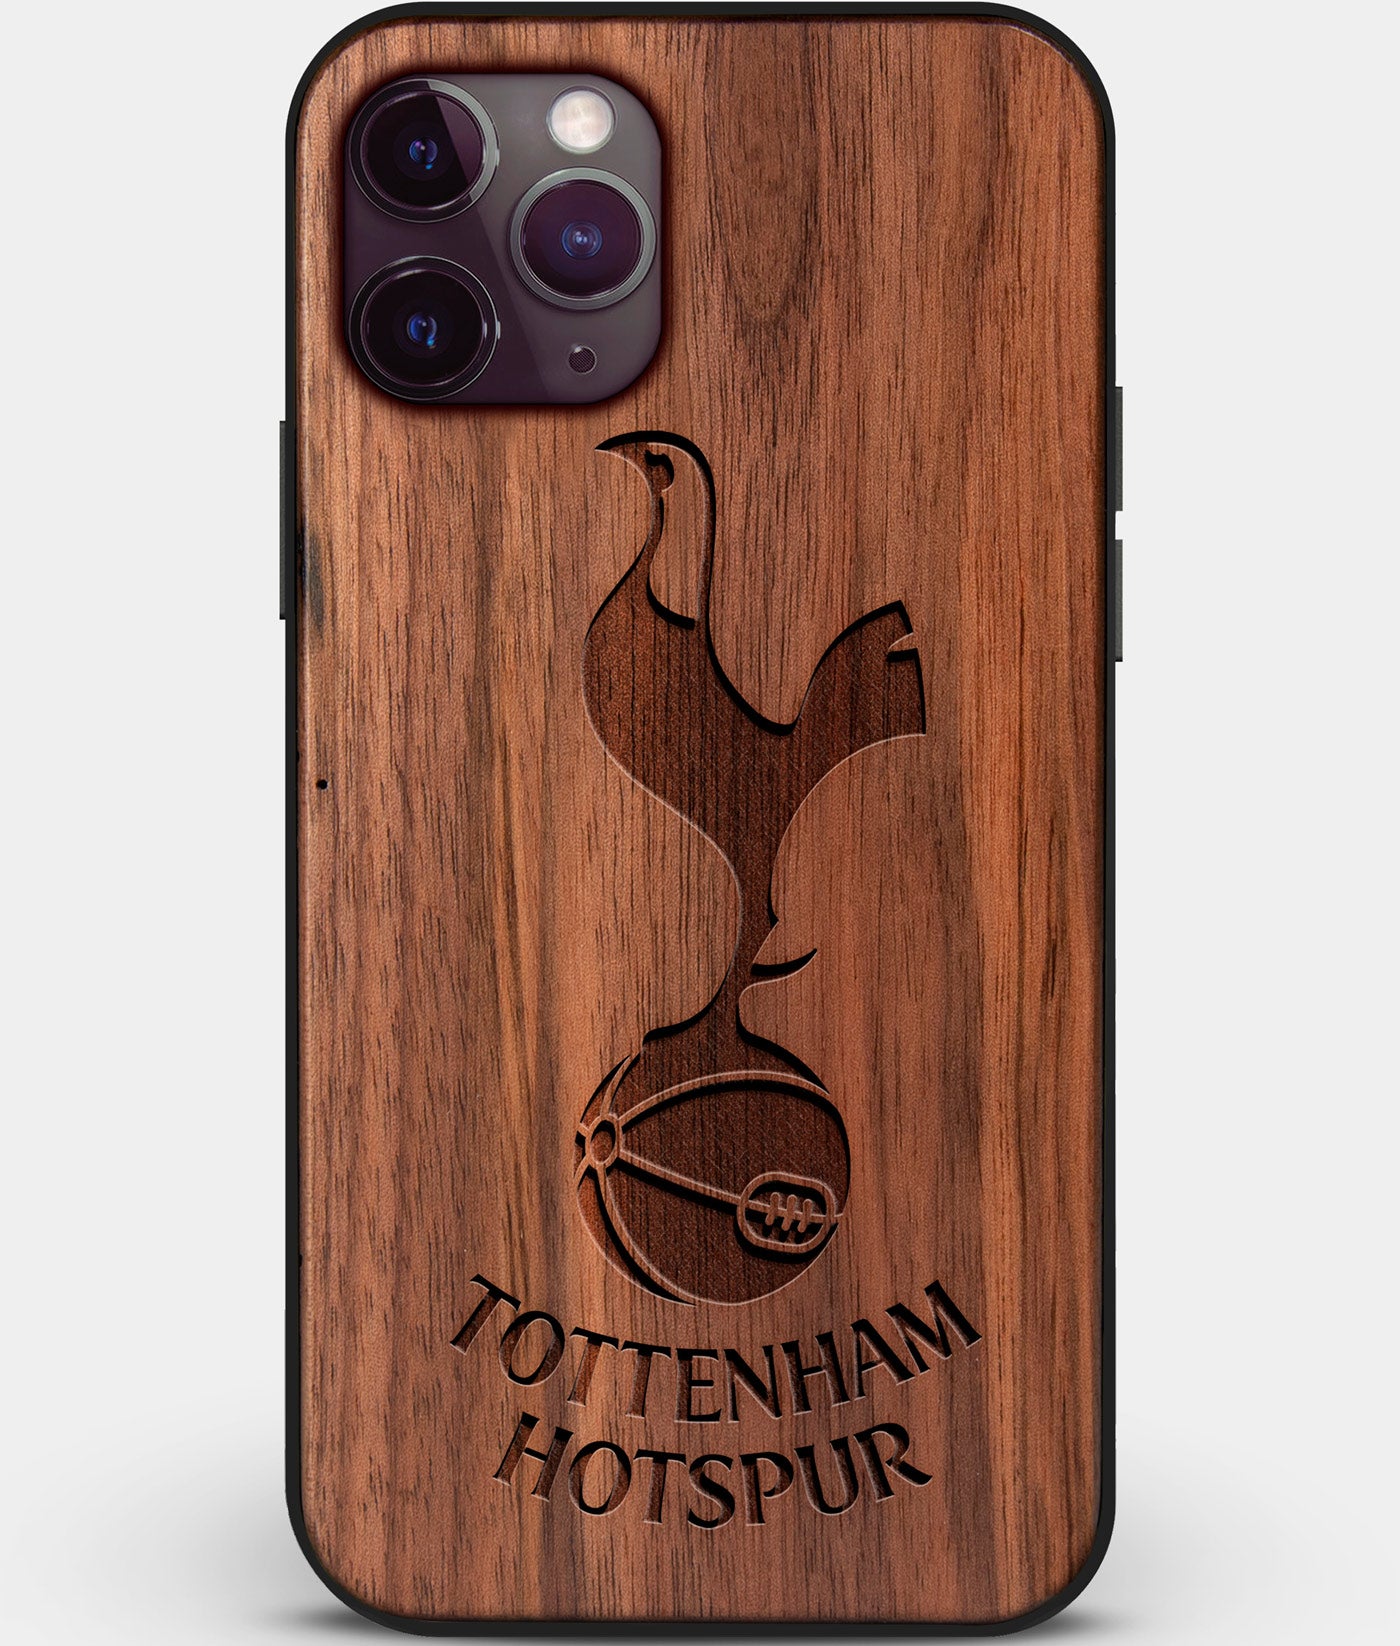 Custom Carved Wood Tottenham Hotspur F.C. iPhone 11 Pro Case | Personalized Walnut Wood Tottenham Hotspur F.C. Cover, Birthday Gift, Gifts For Him, Monogrammed Gift For Fan | by Engraved In Nature